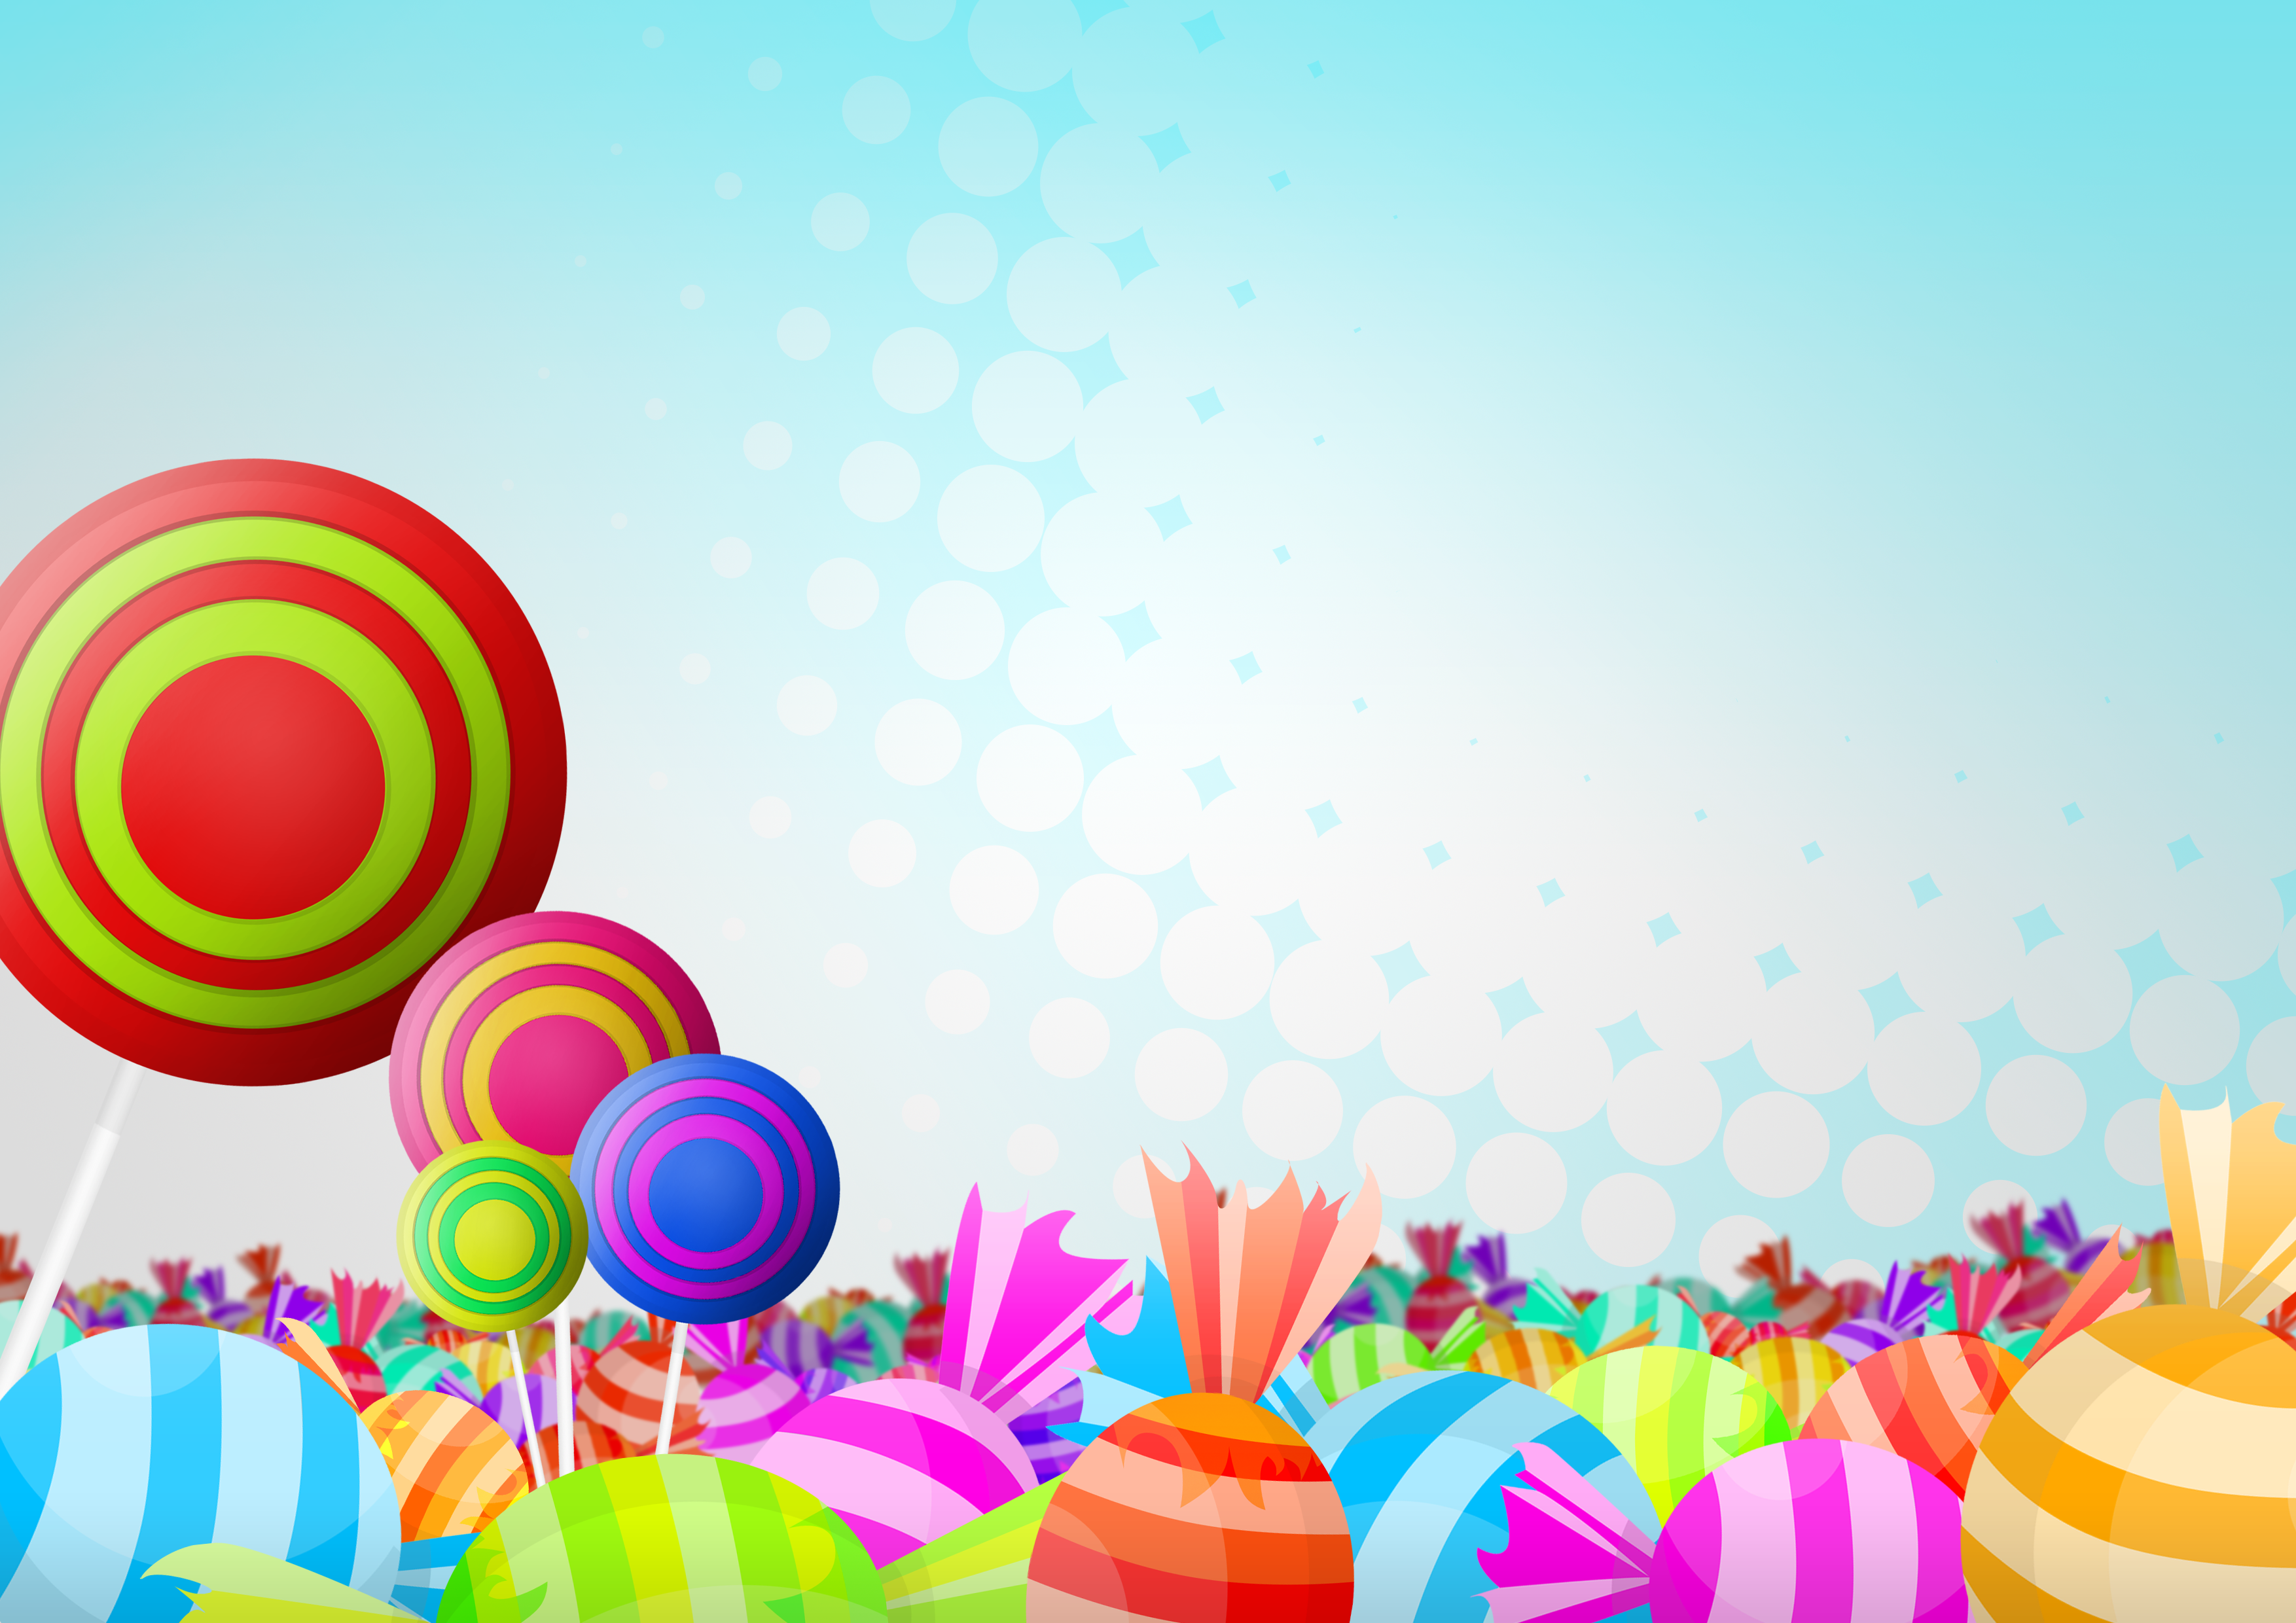 Candy Land By Zjxtreme Digital Art Vector Food Drinks For